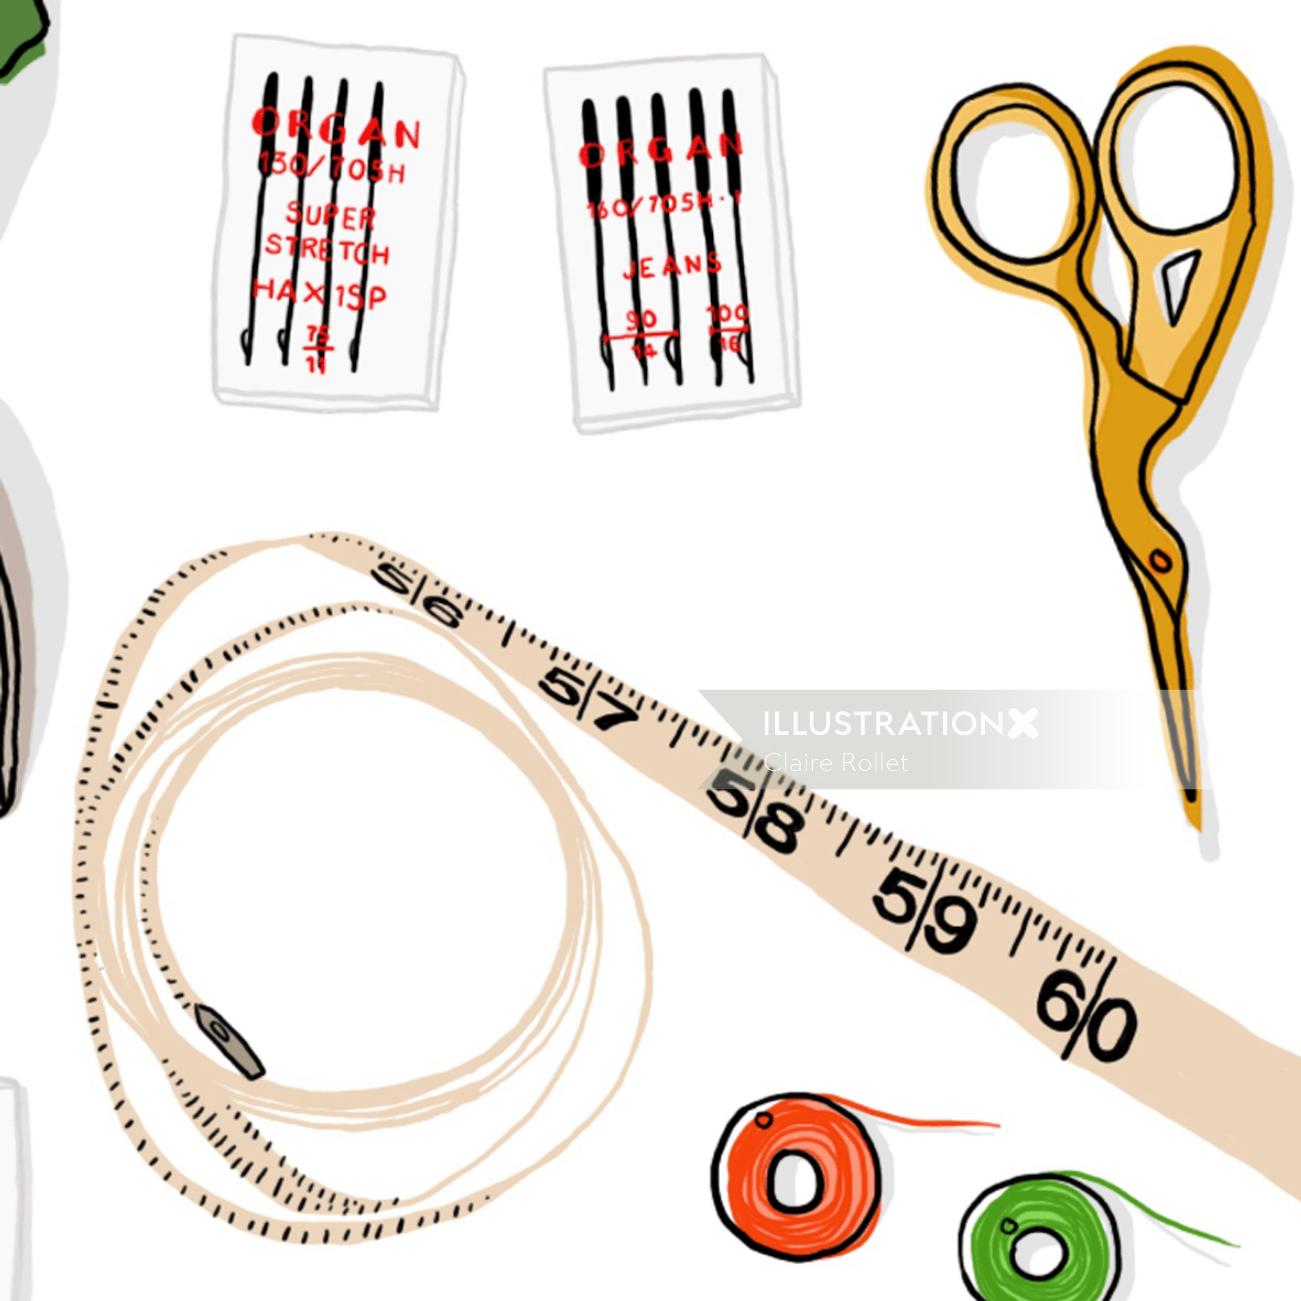 illustration of sewing tools by Claire Rollet